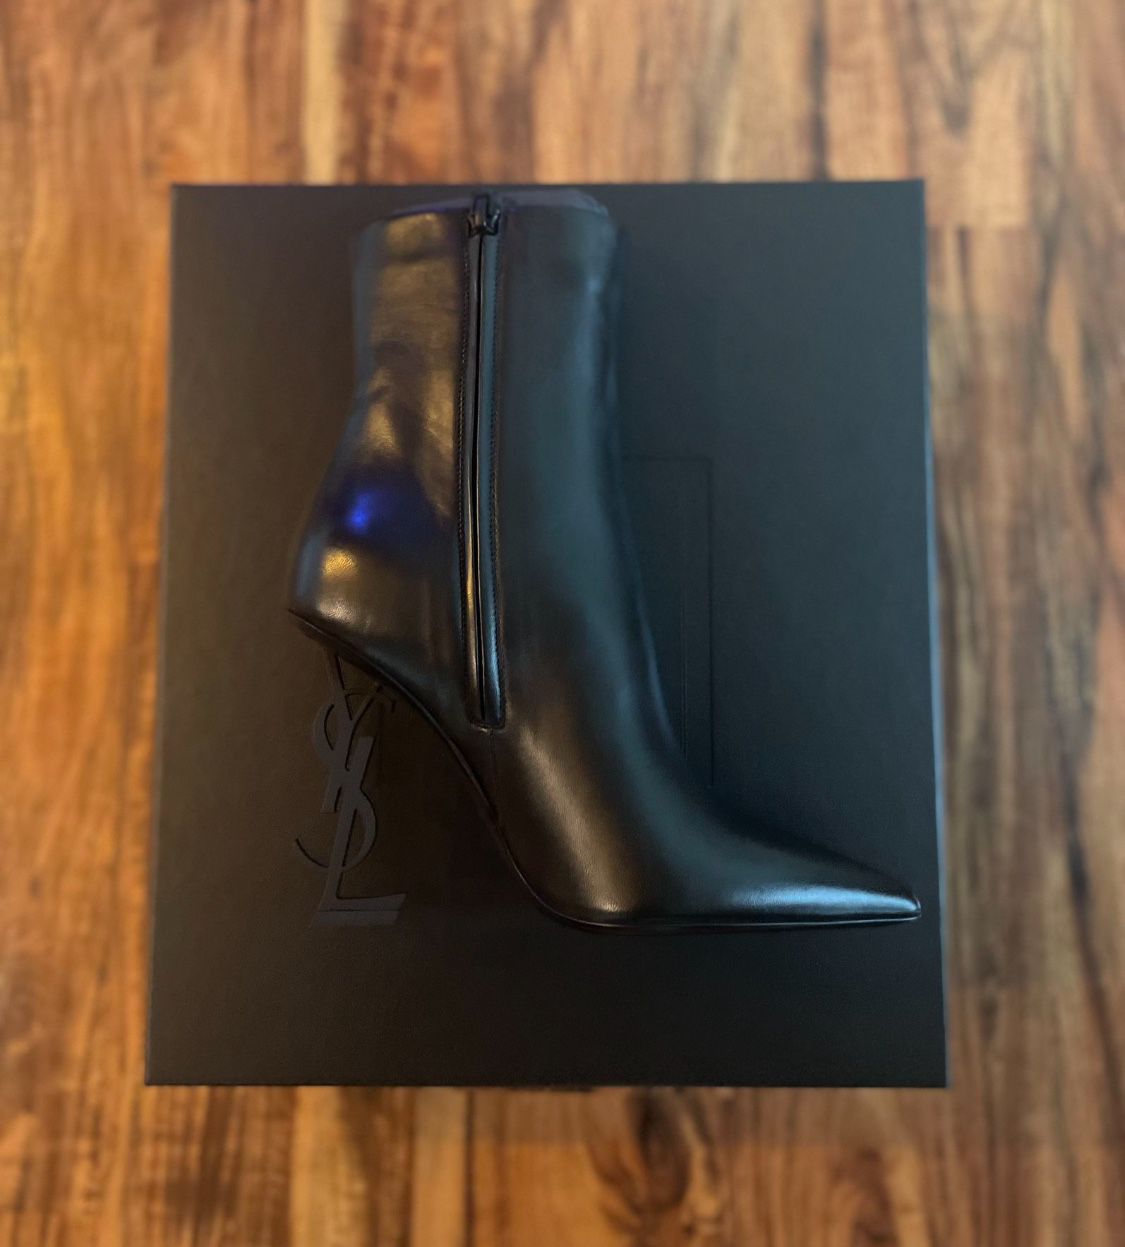 Authentic YSL Boots